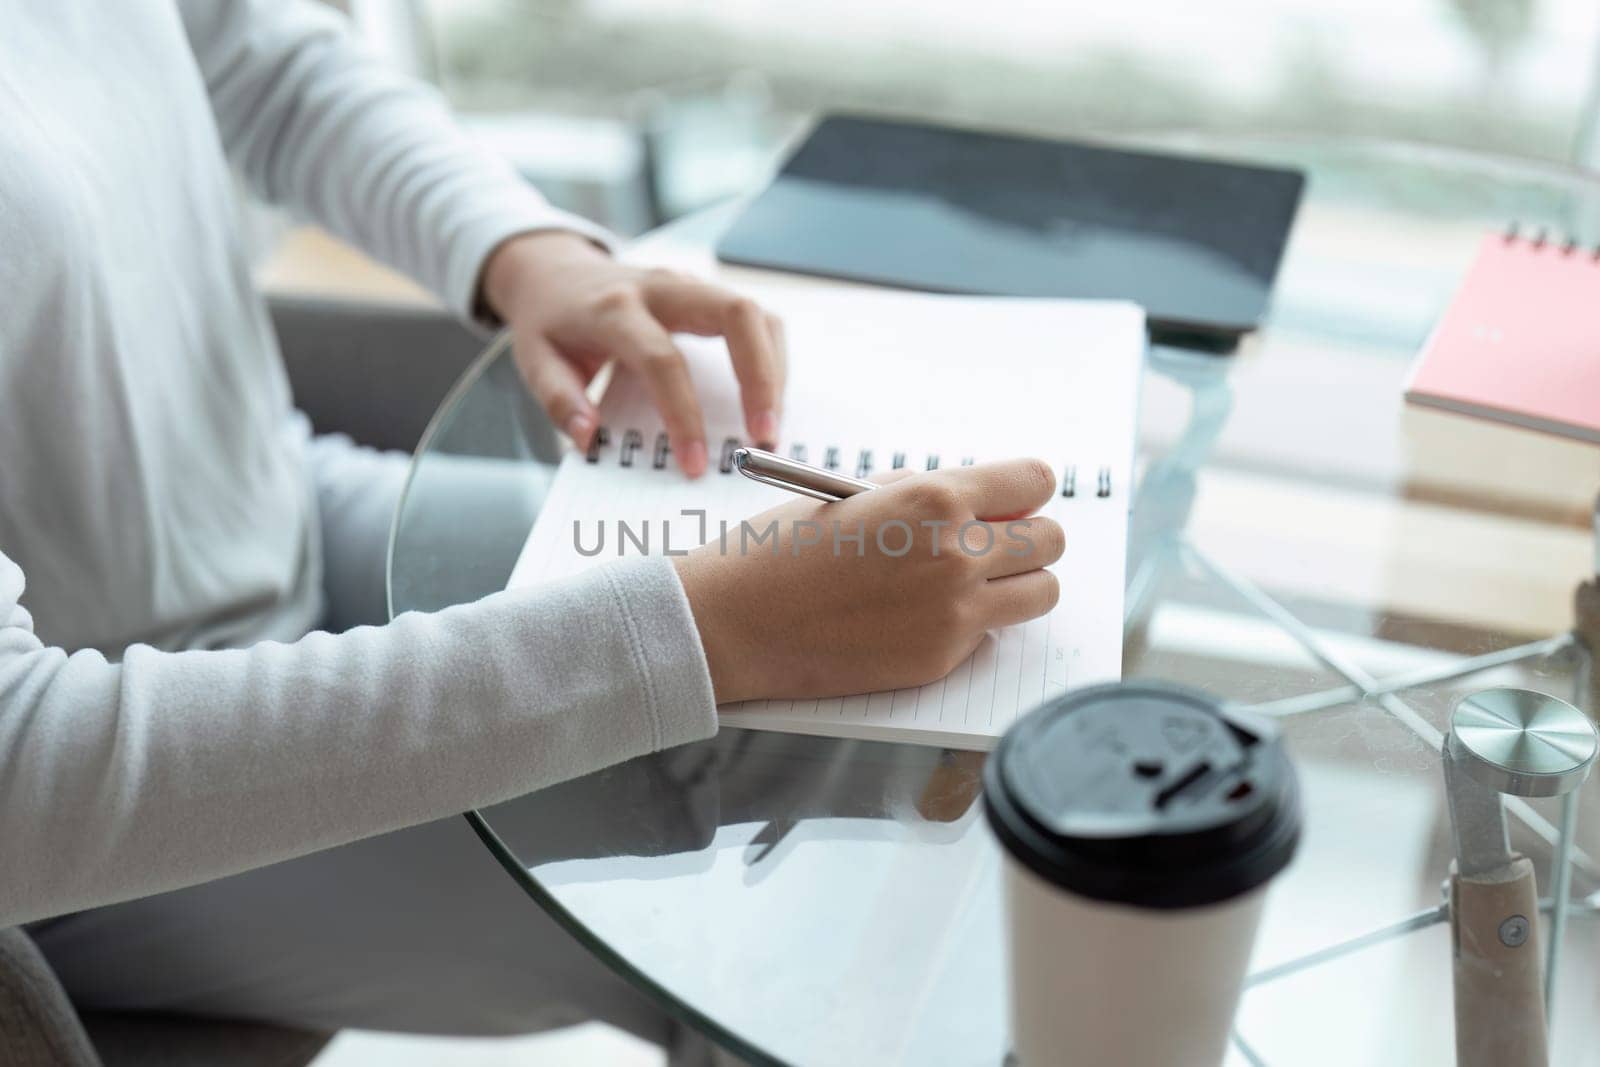 Write daily list before start each day. hands of businesswoman writing in her notebook while working at desk.